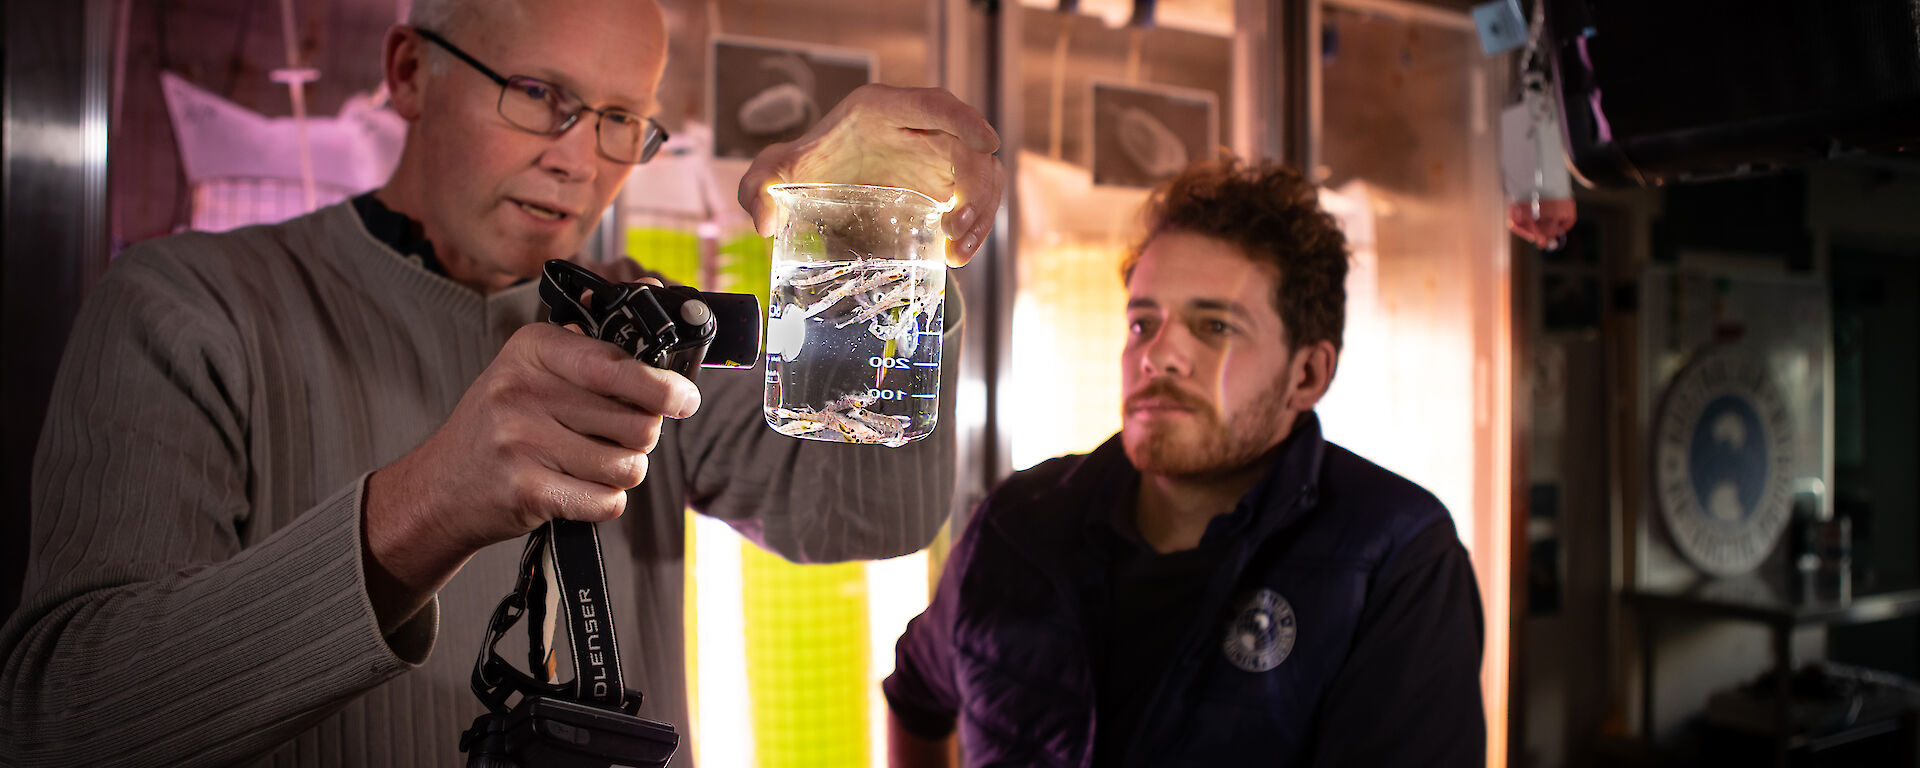 2 scientists stand in an aquarium lab. They hold a light up to a beaker of water in which small organisms are swimming.